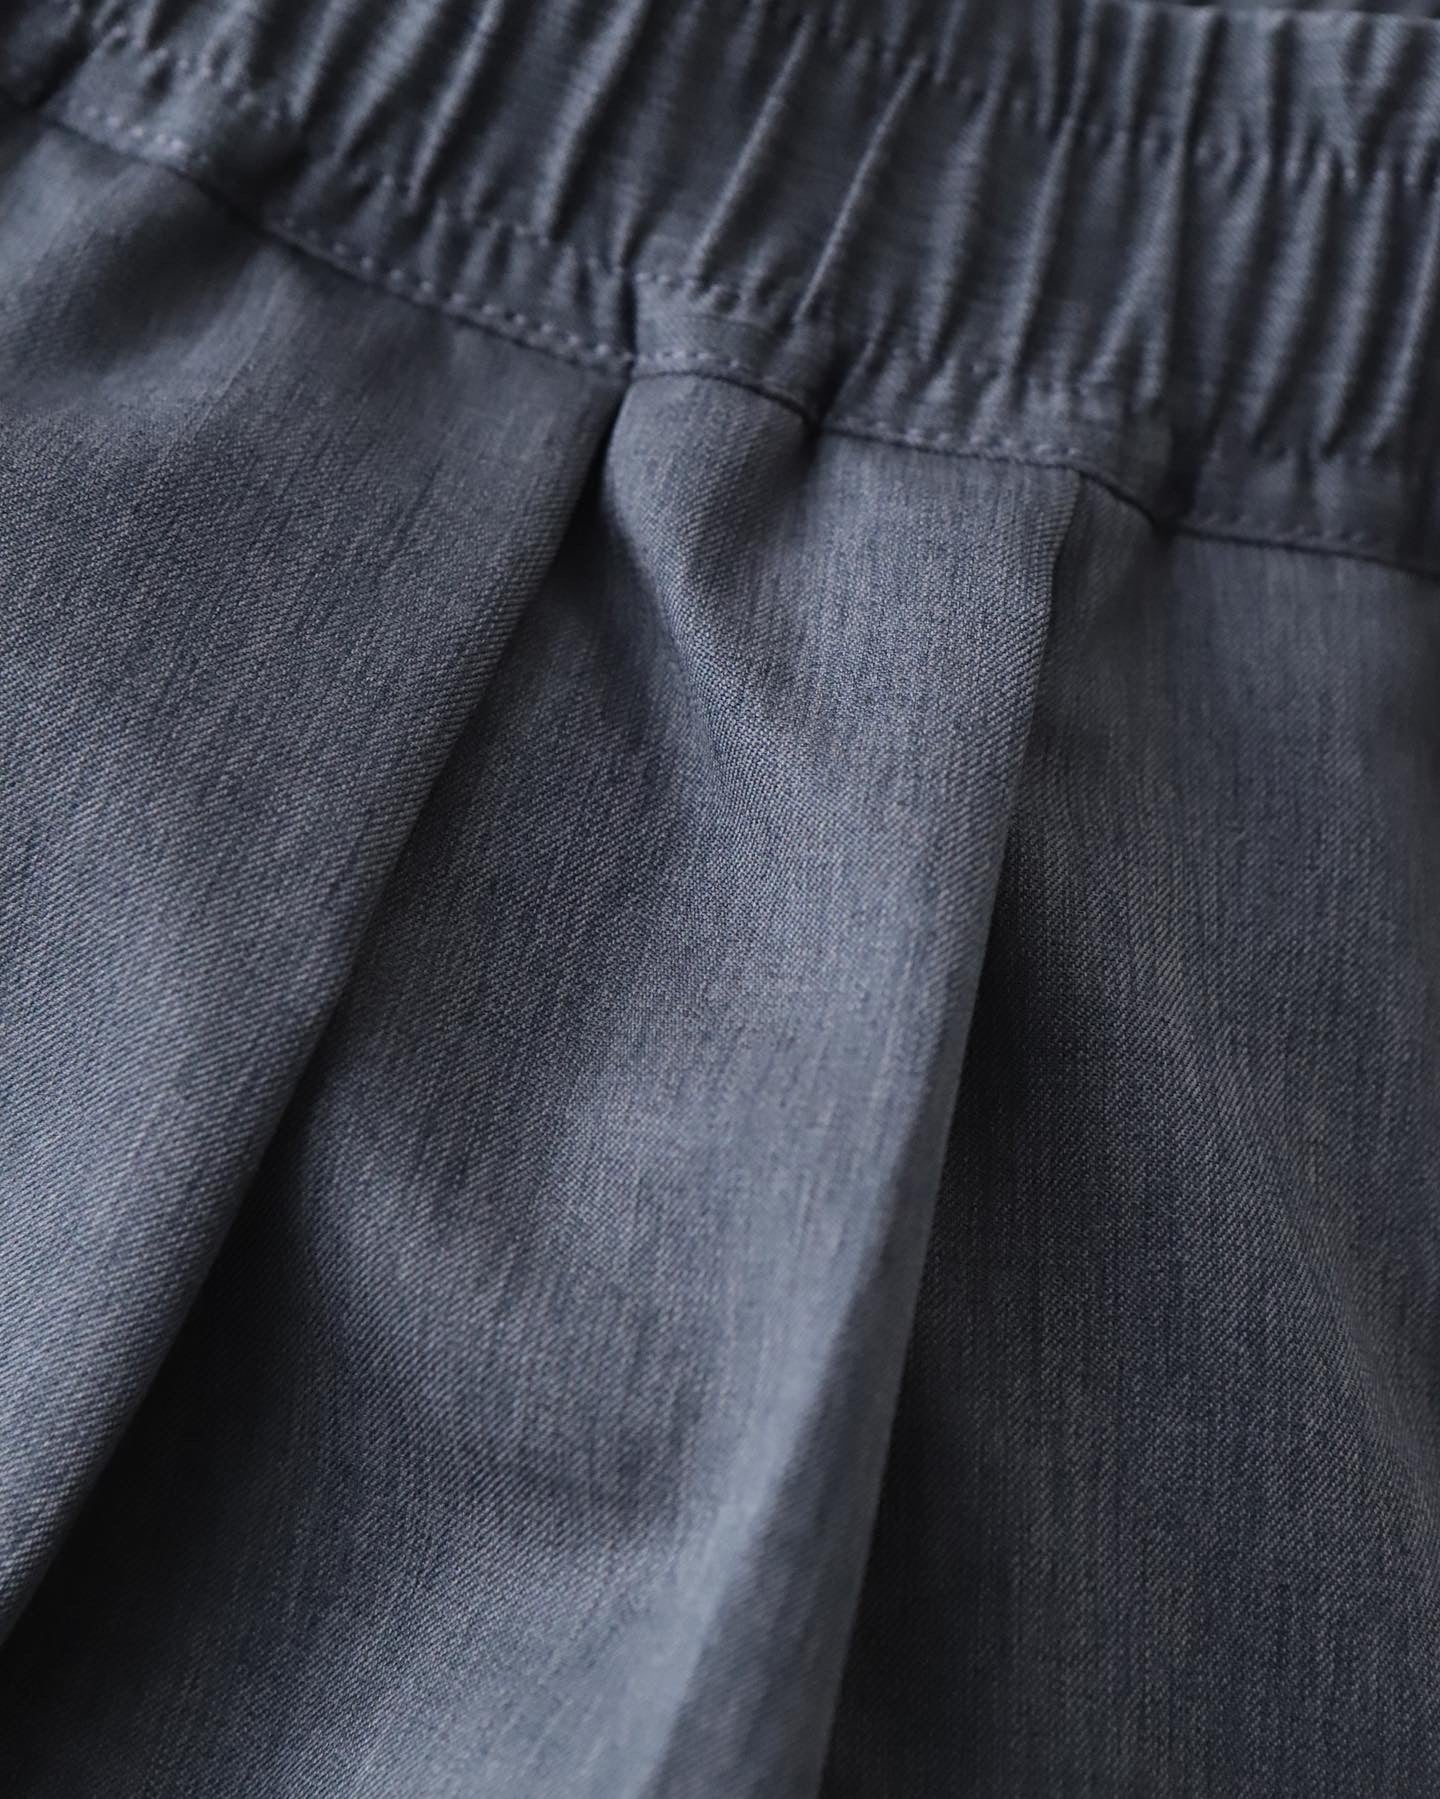 COOLFIBER TWO TUCK EASY PANTS